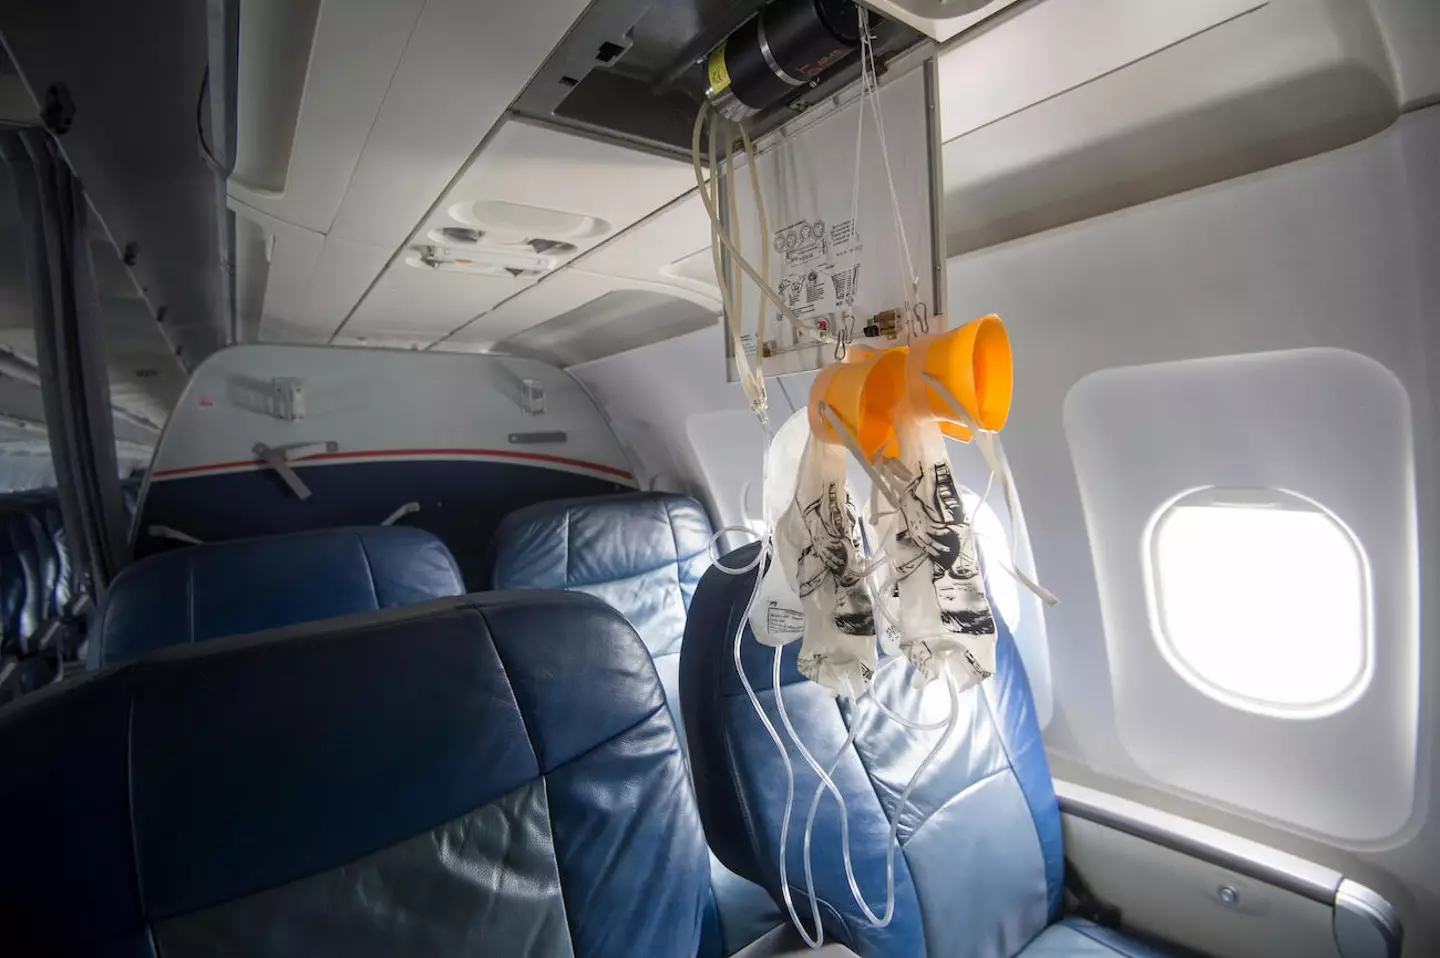 Keeping your calm by putting your oxygen mask on first is rule number one.